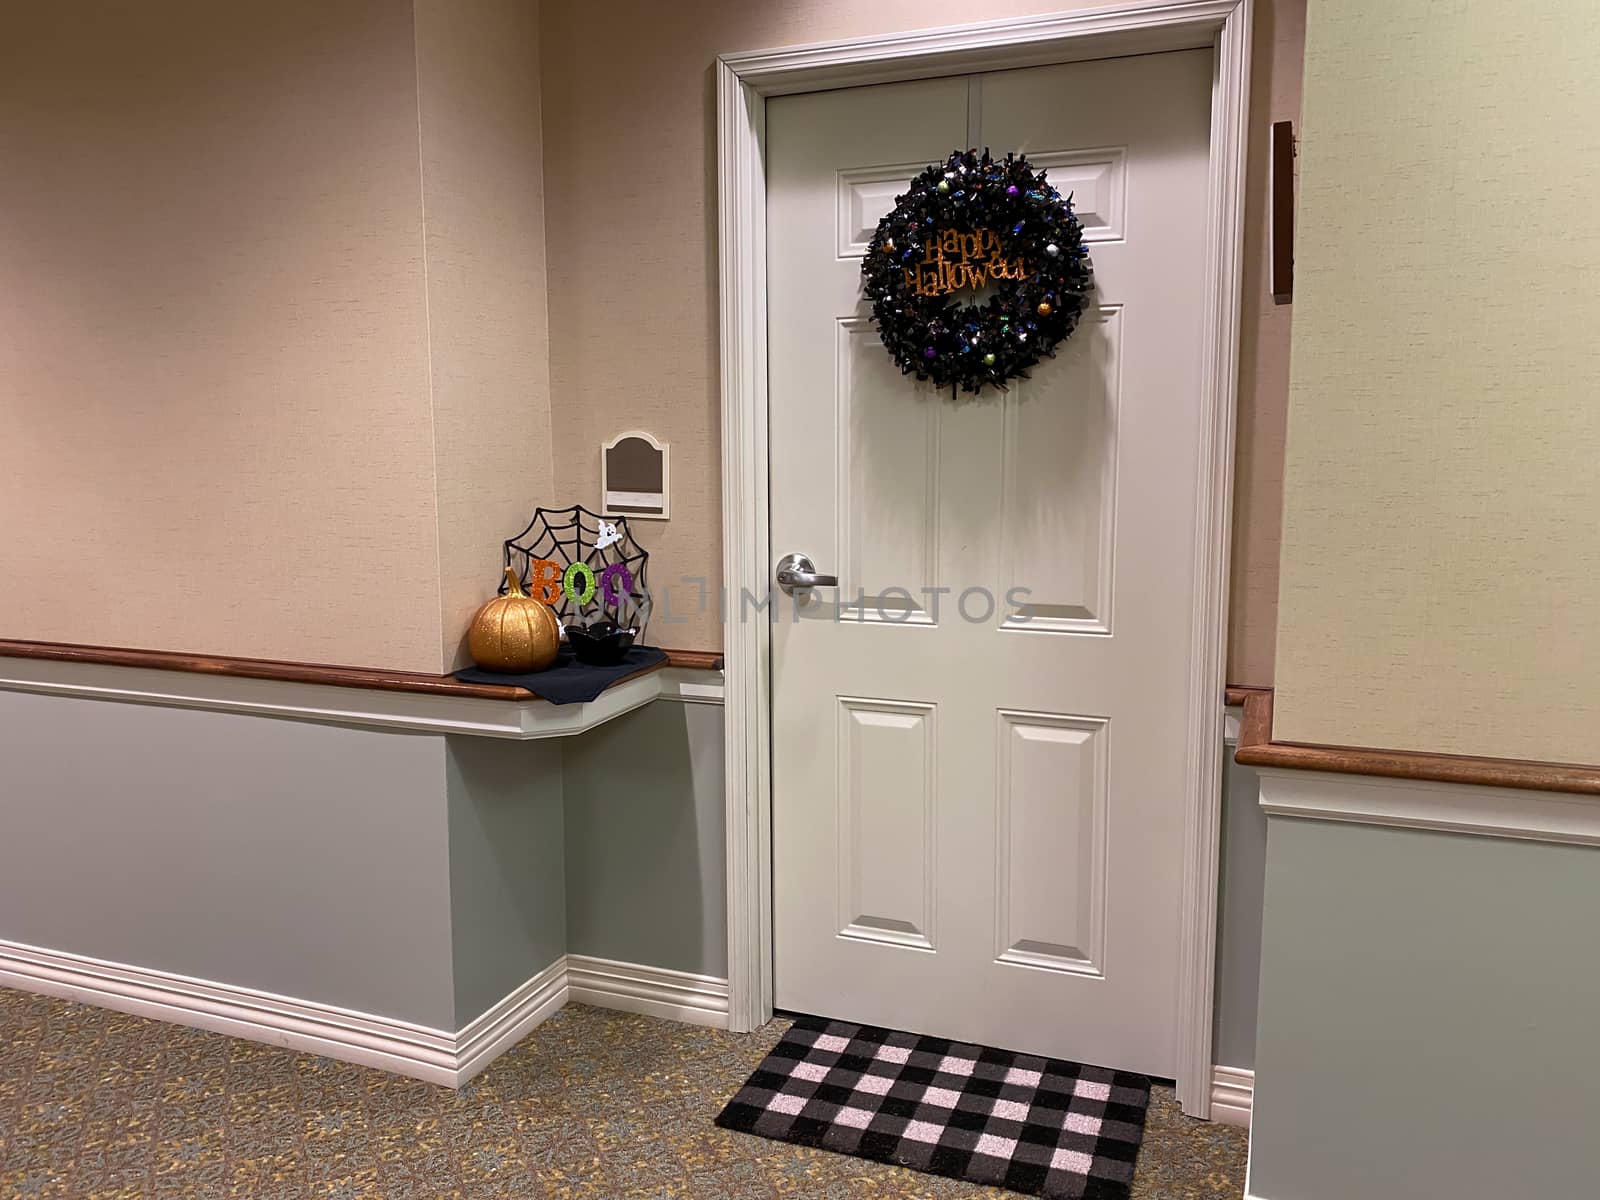 A residents door at a senior living facility decorated with a wreath, pumpkin and spider web for halloween,